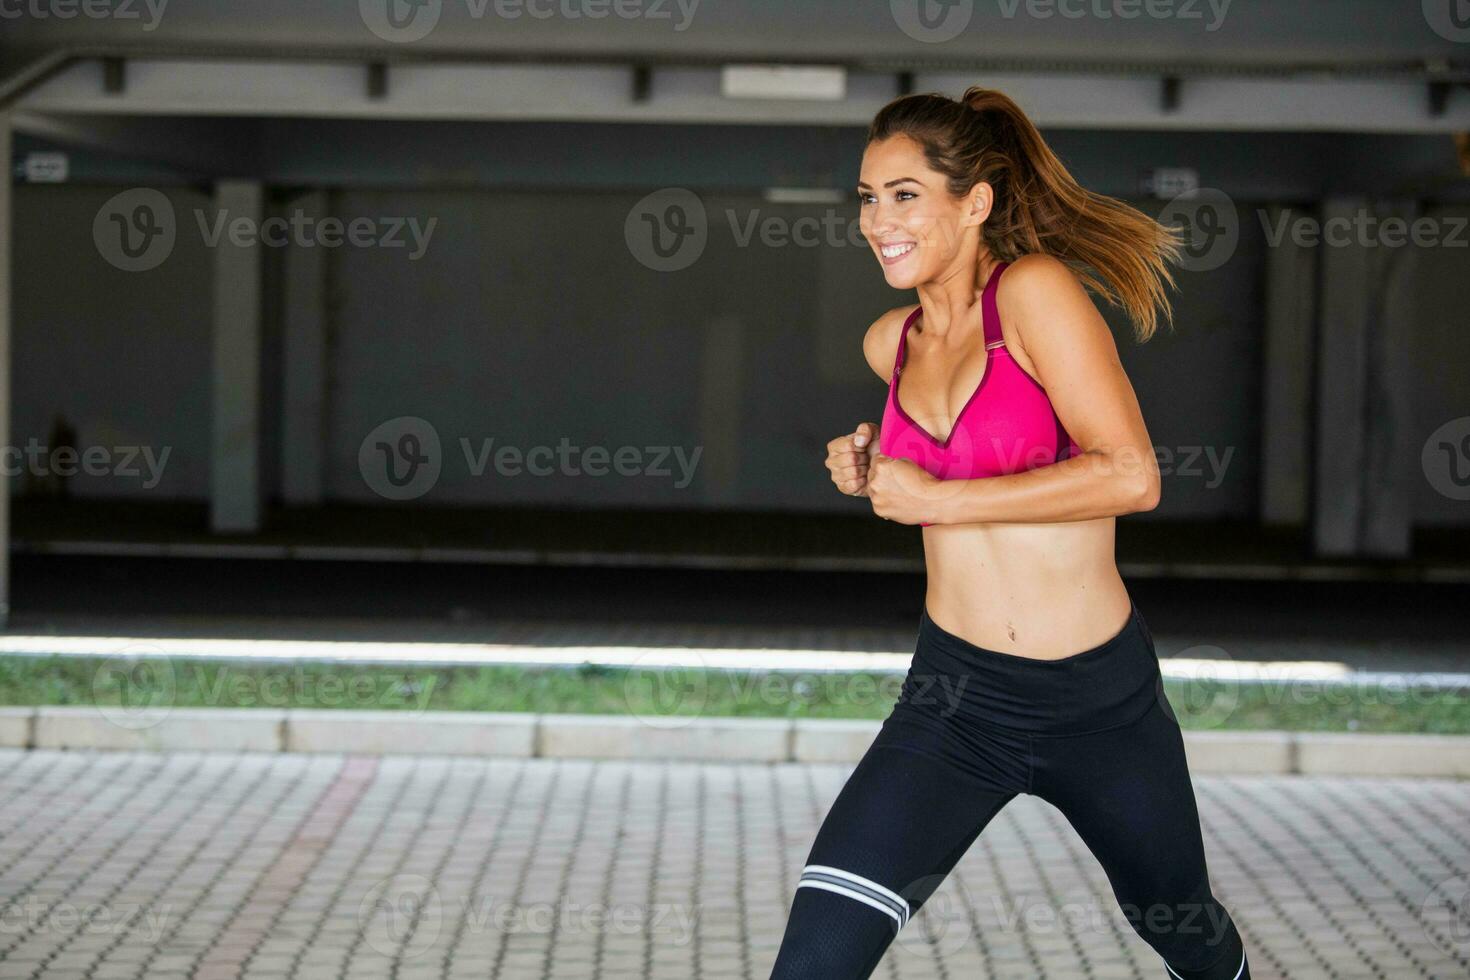 https://static.vecteezy.com/system/resources/previews/023/748/778/non_2x/young-woman-with-fit-body-jumping-and-running-against-grey-background-female-model-in-sportswear-exercising-outdoors-photo.jpg